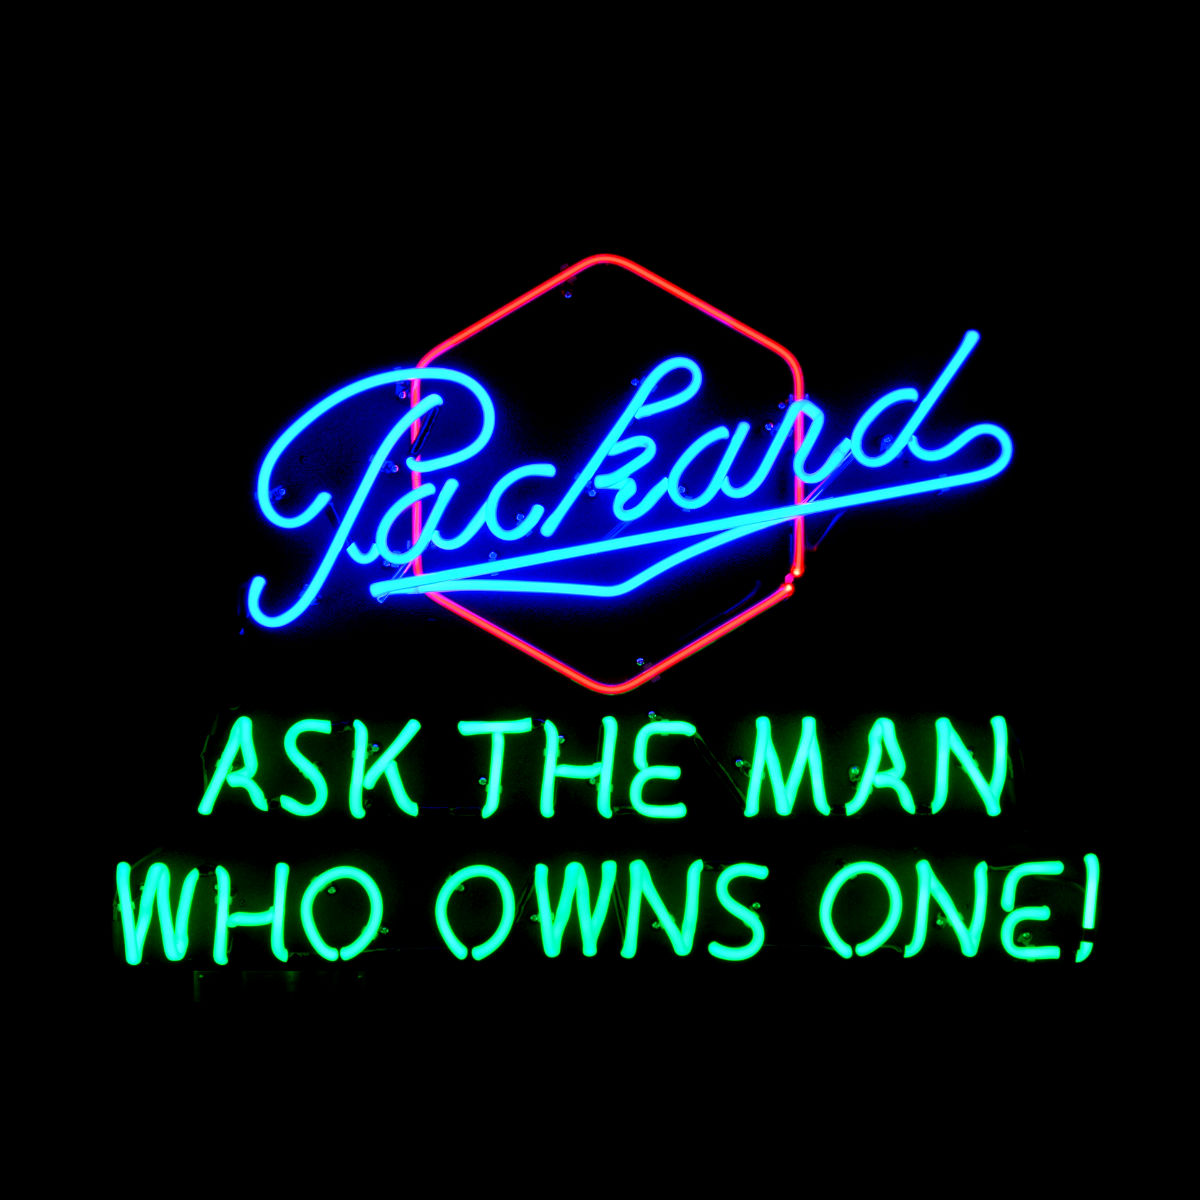 re-sized photo - Packard - Ask The Man Who Owns One - custom Packard neon.jpg